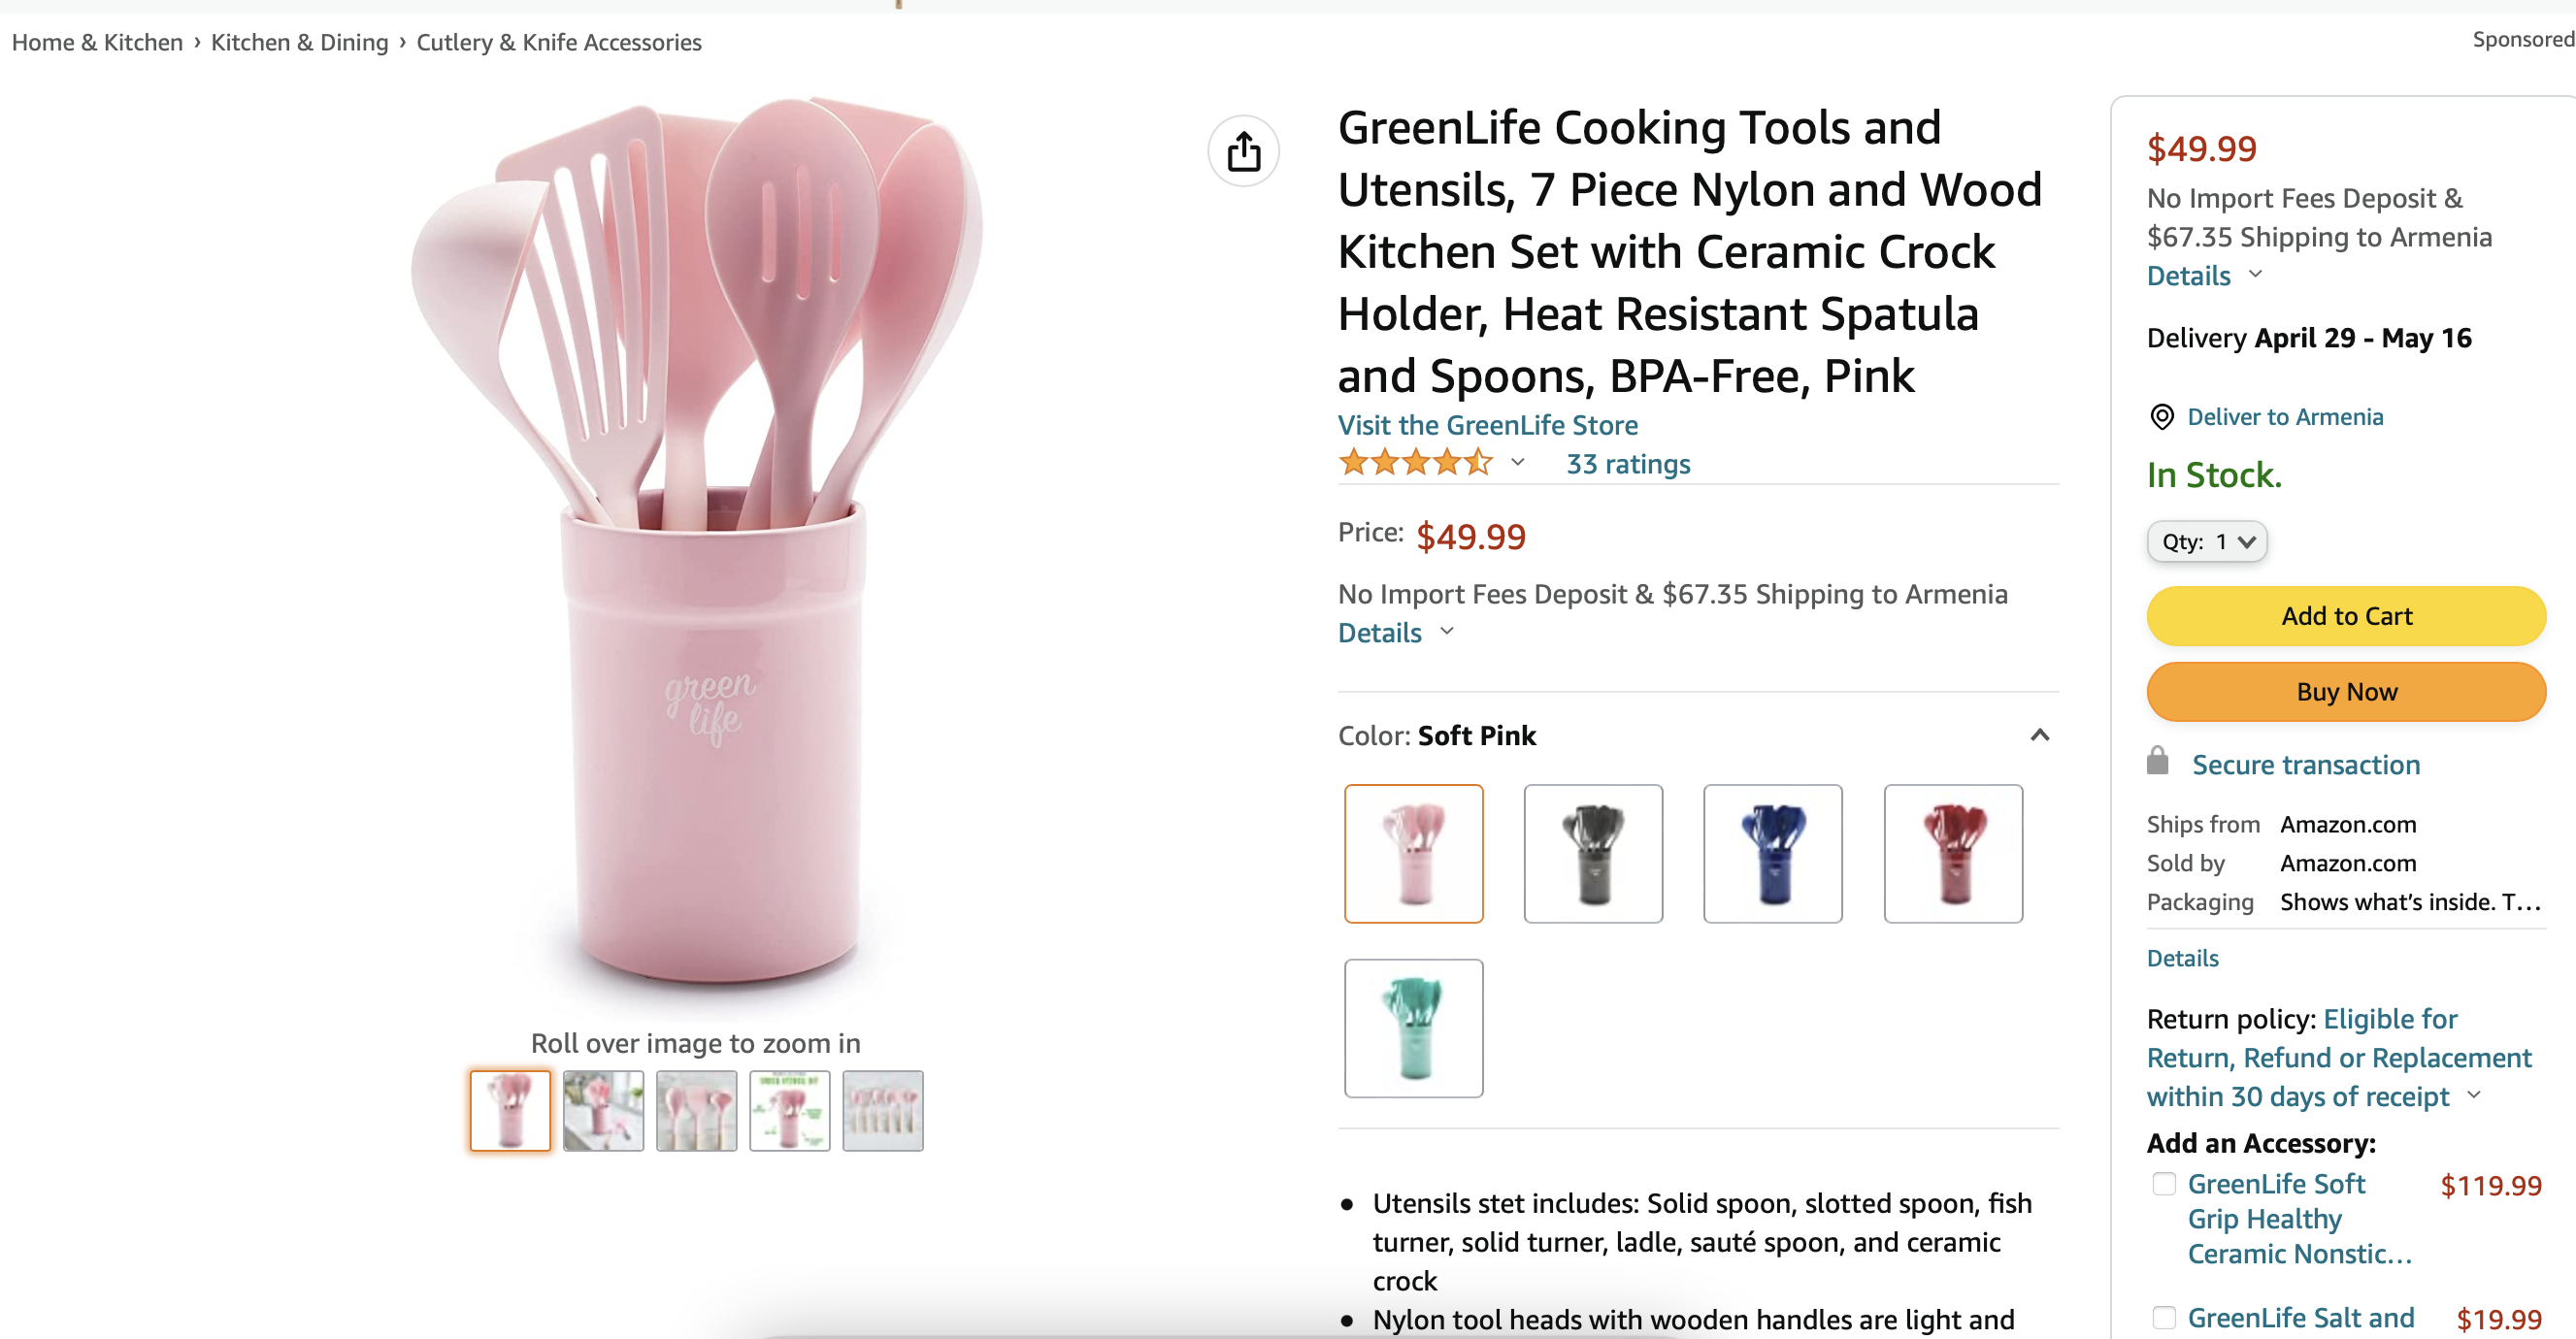 How to sell kitchen supplies on Amazon and social media?